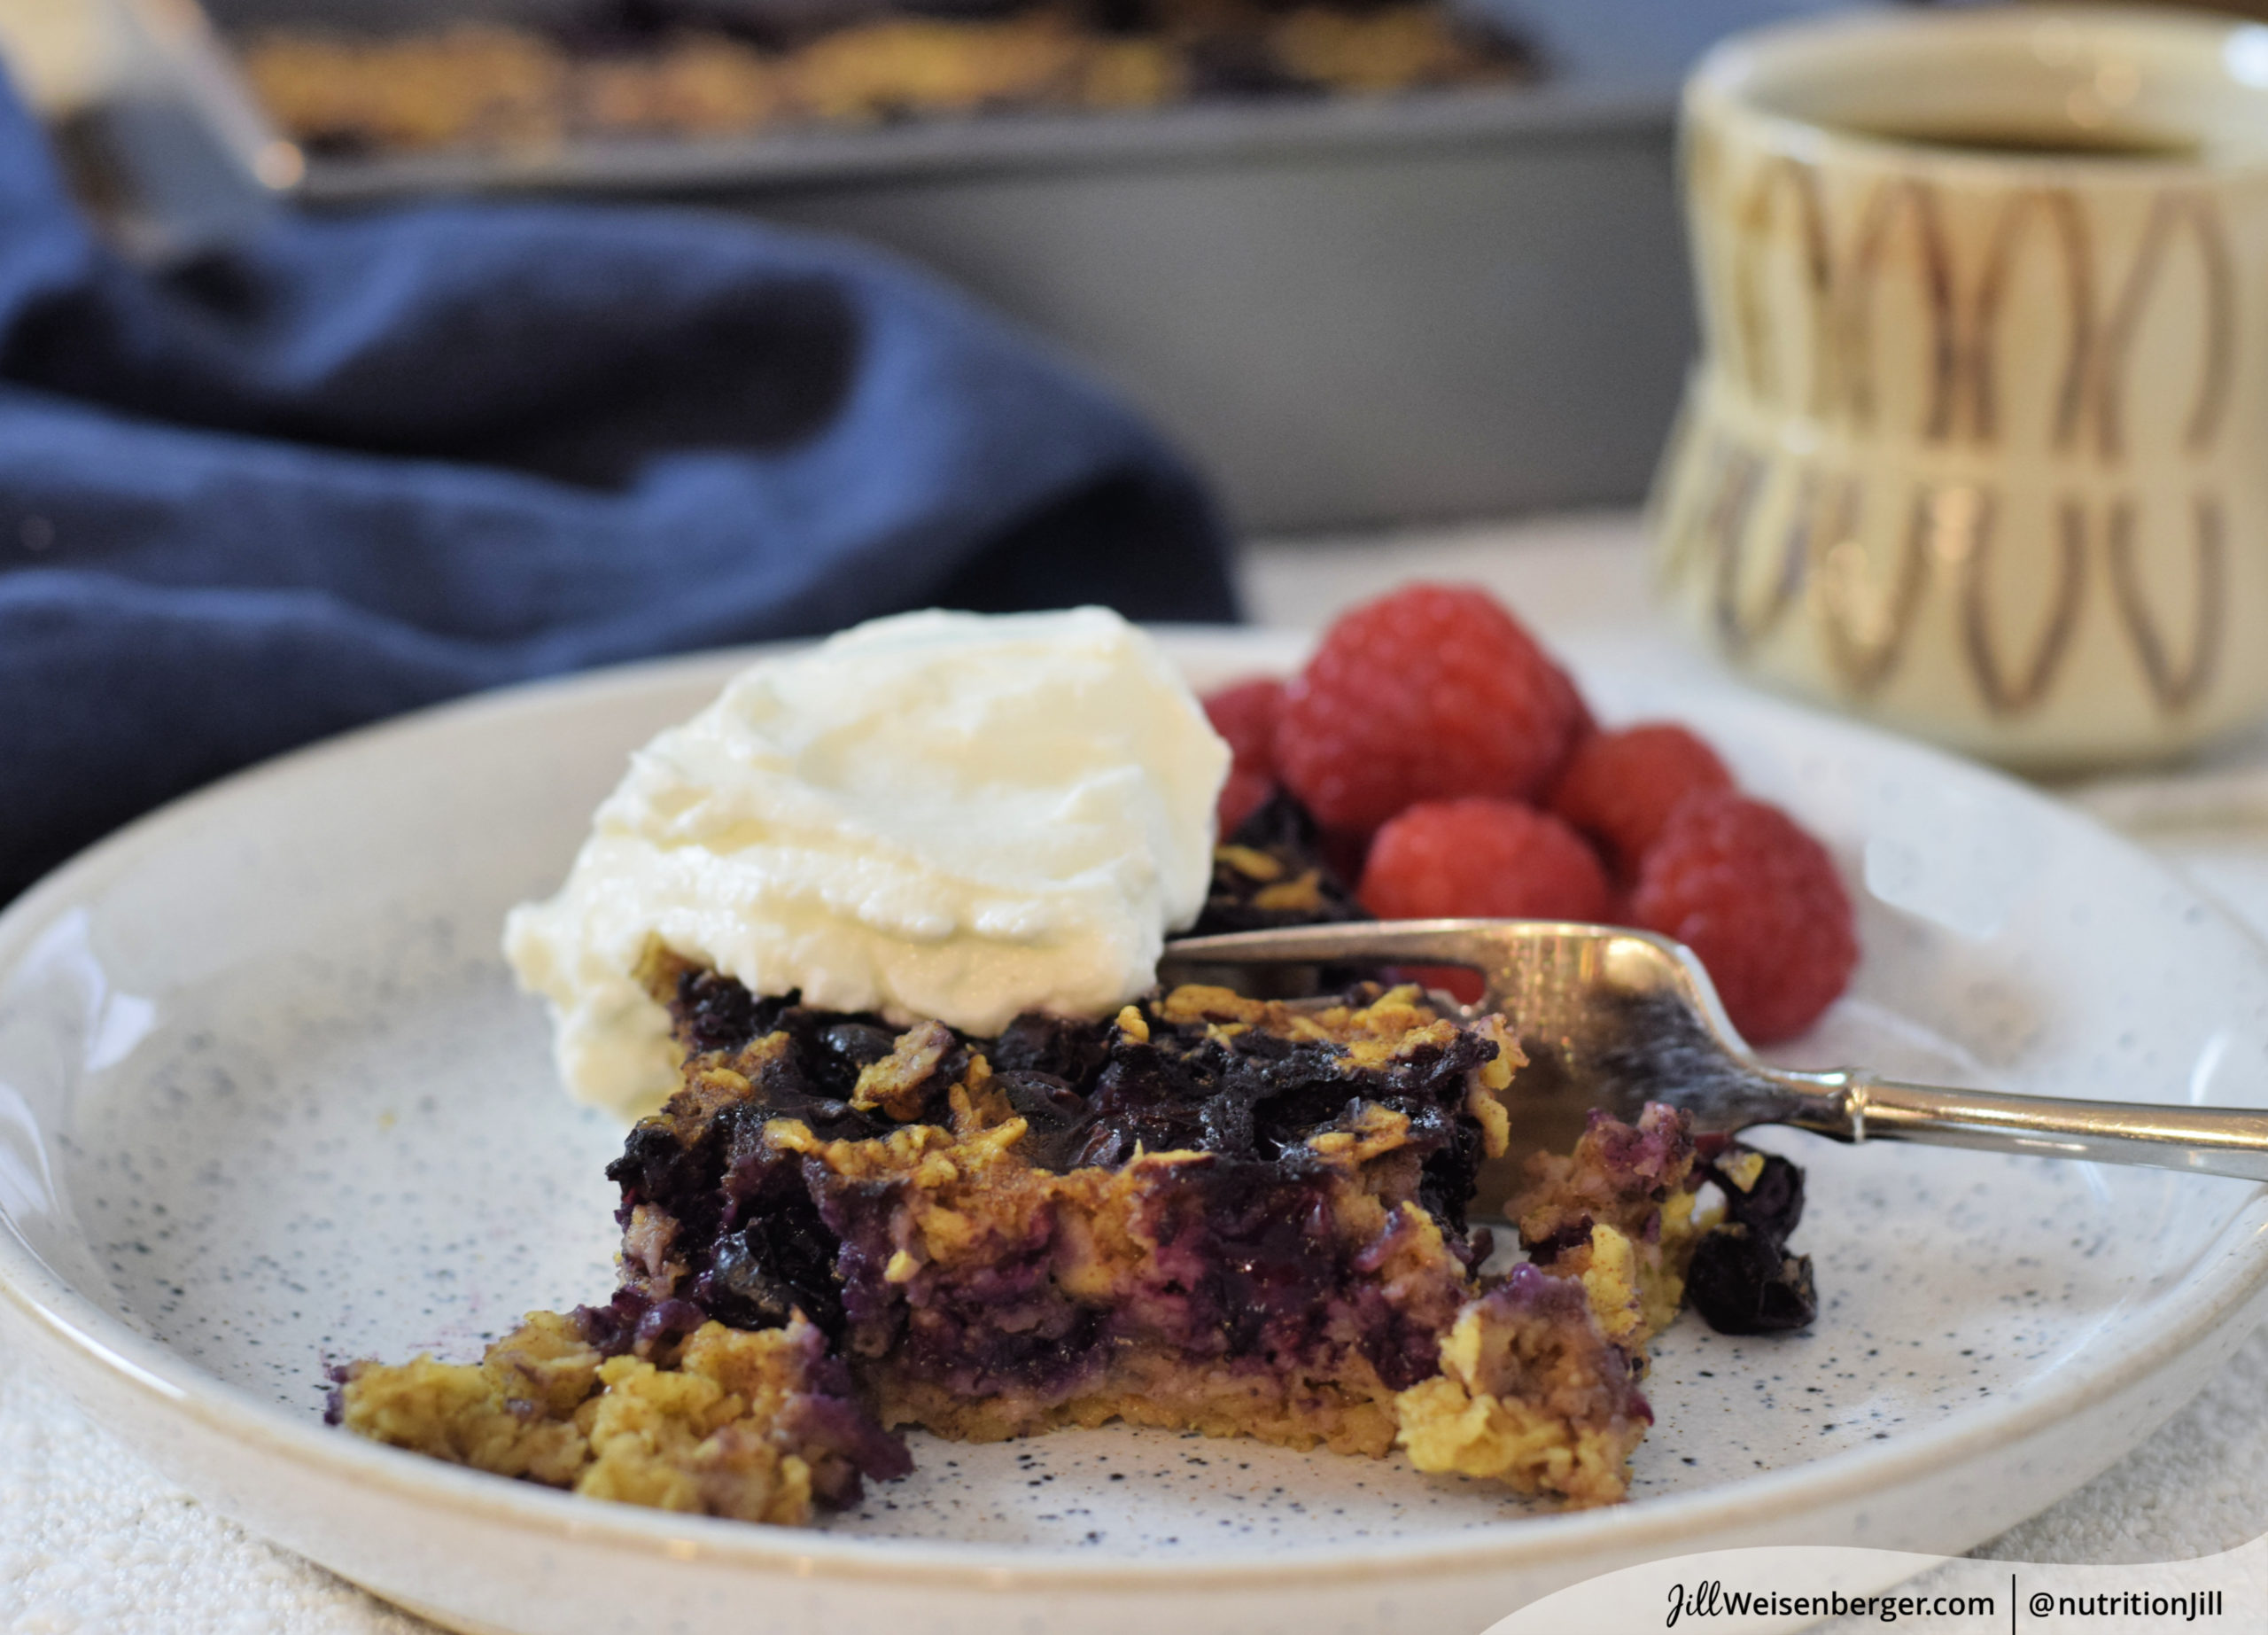 blueberry baked oatmeal recipe on plate with fork